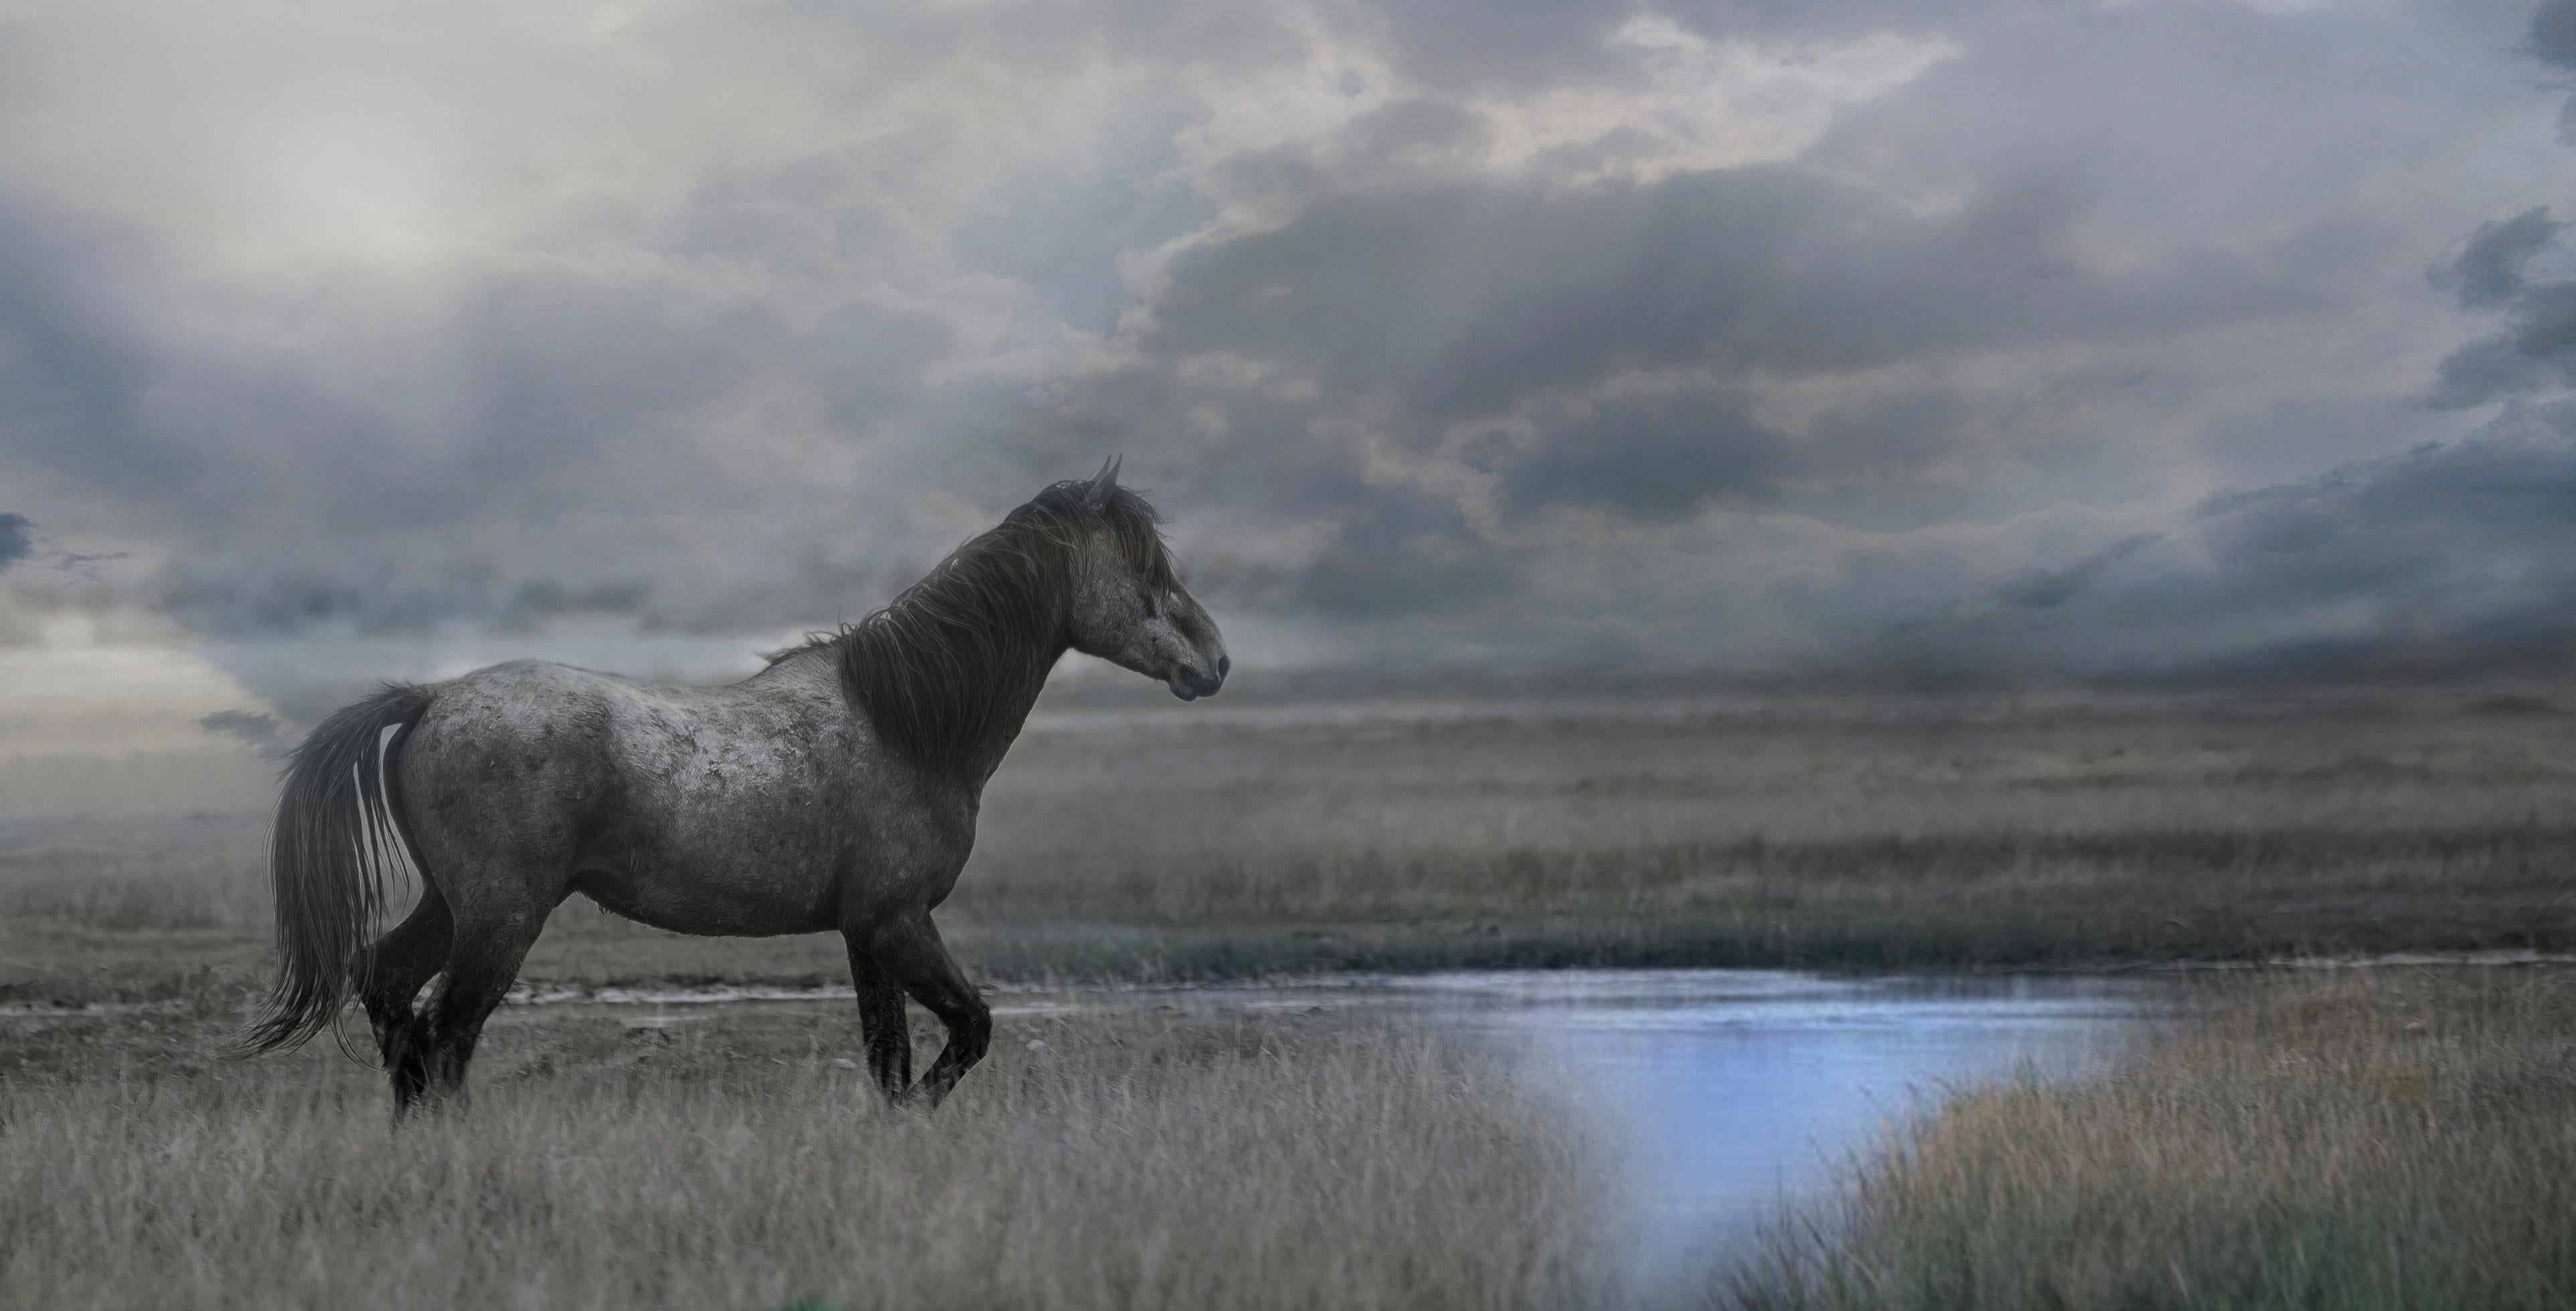 Shane Russeck Landscape Photograph - Once Upon a Time in the West - 30 x 60  Contemporary  Photography of Wild Horses